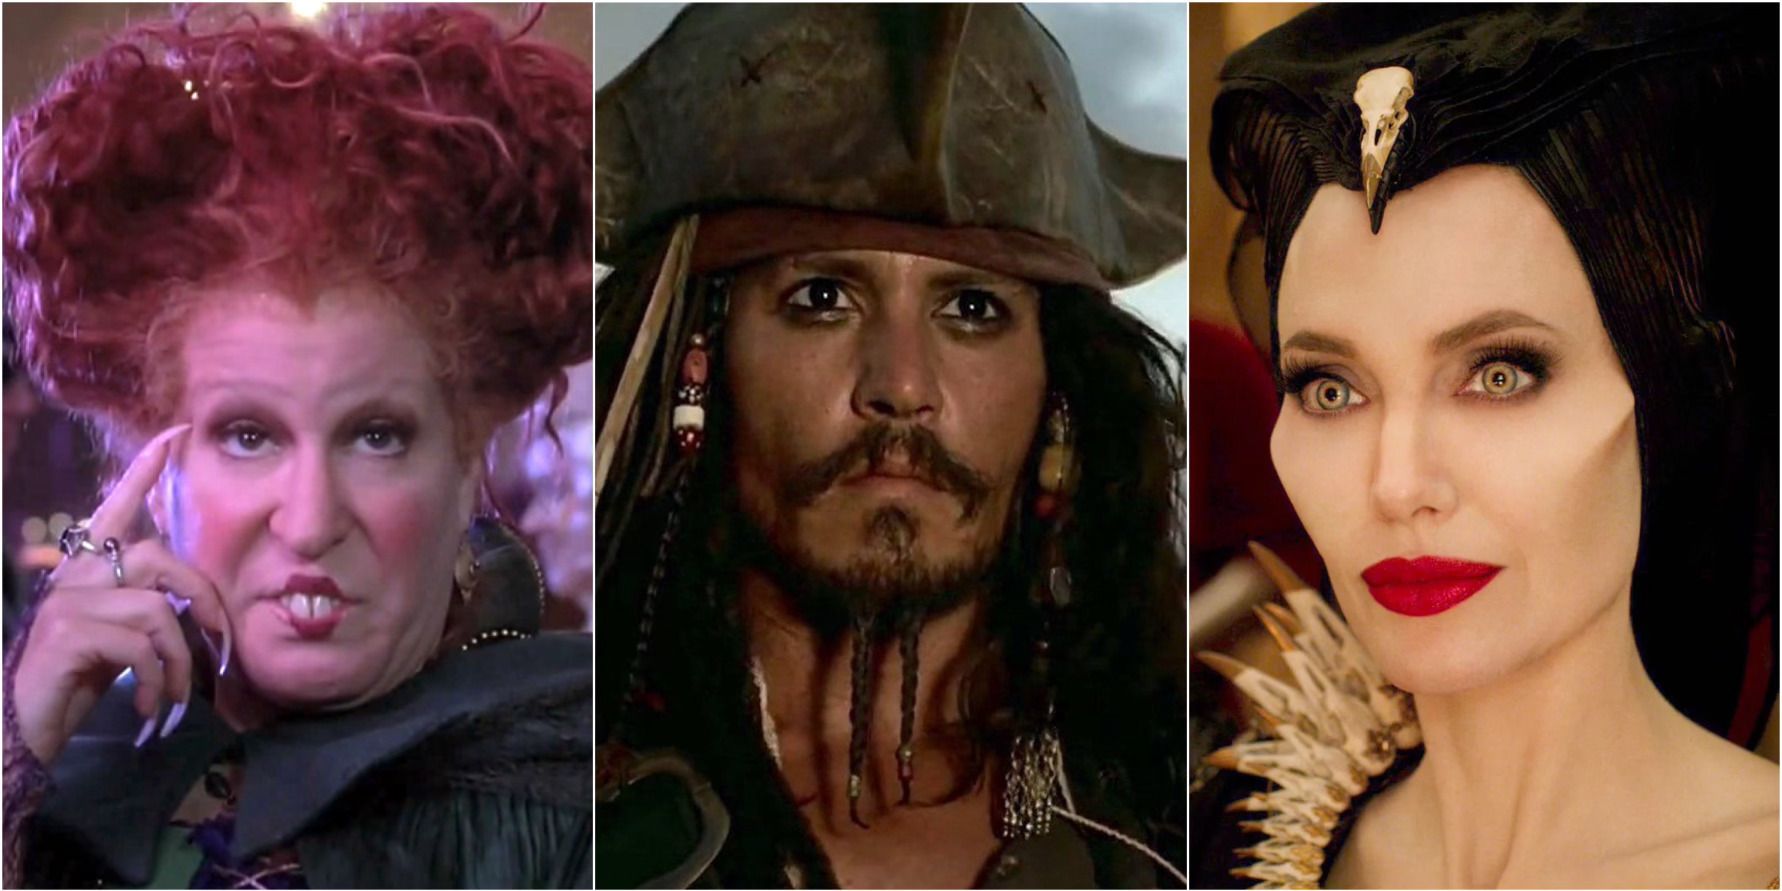 Bette Midler as winifred, Johnny Depp as Jack Sparrow, and Angelina Jolie as Maleficent